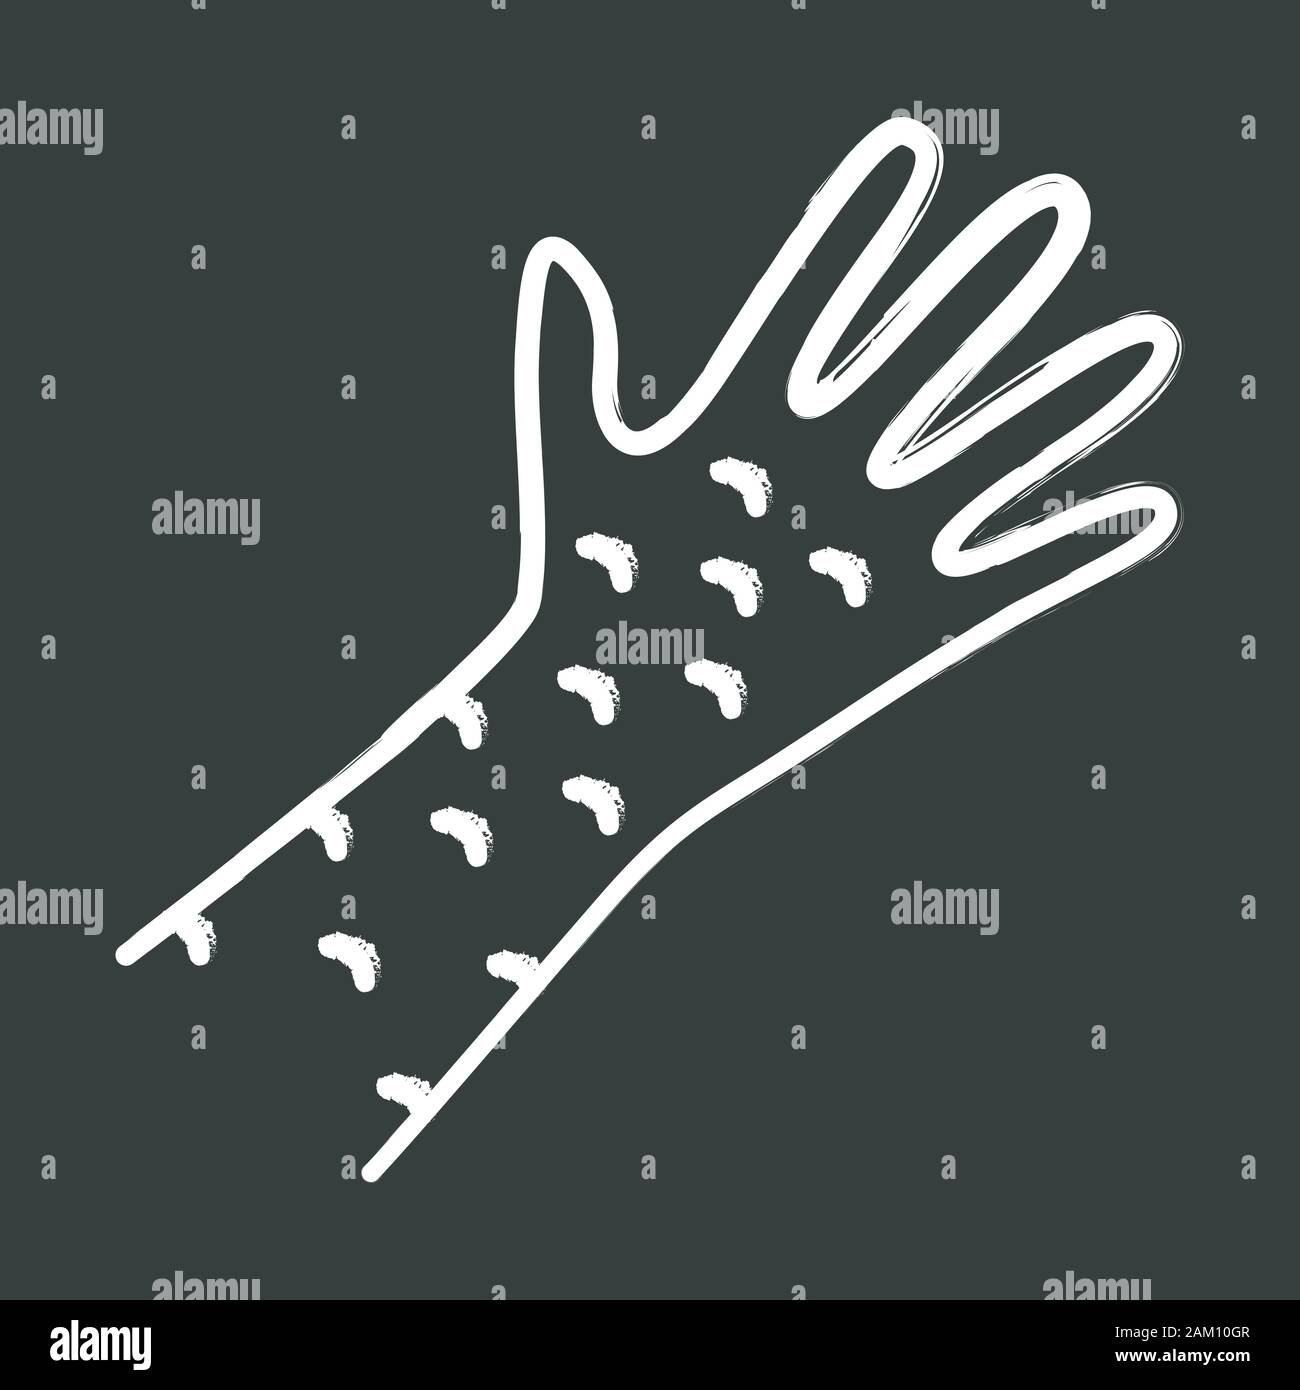 Skin rash, hives chalk icon. Food, medication, insect bites allergy reaction. Urticaria, eczema, psoriasis. Irritation, bumps on hand. Rubeola, measle Stock Vector